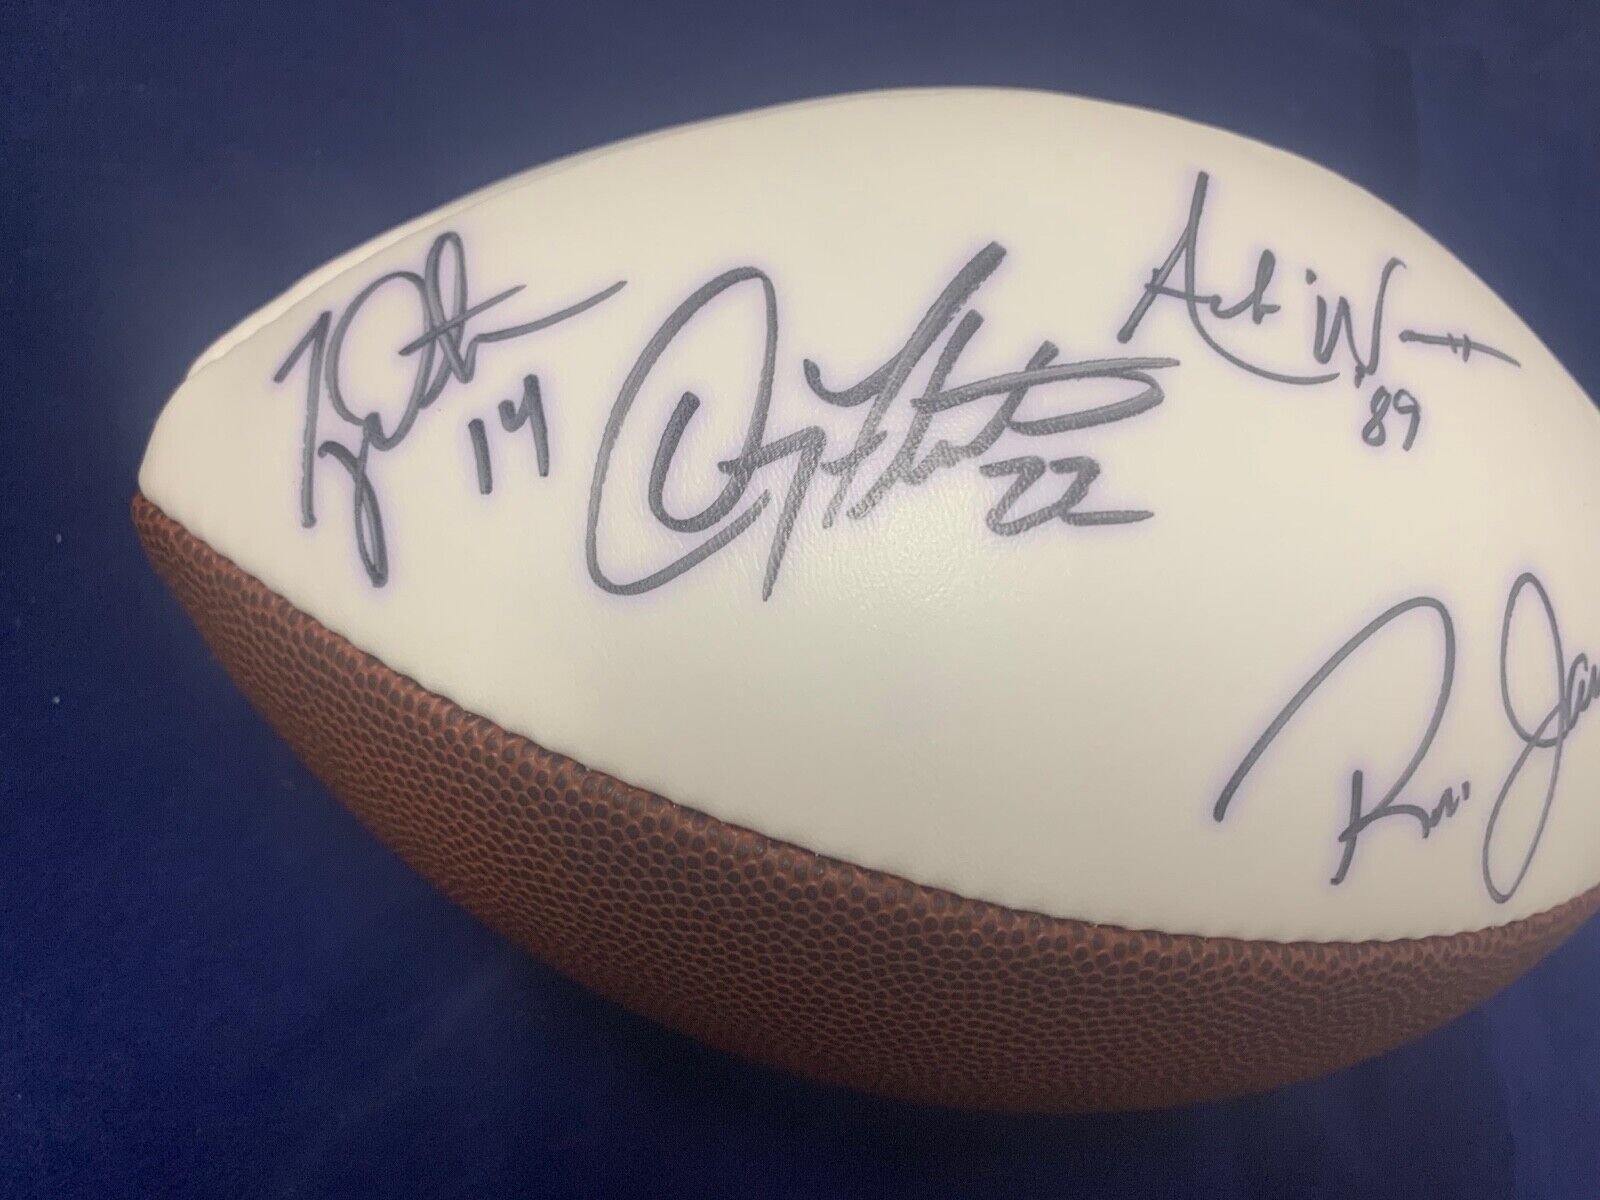 Davey O Brien Award Signed Ball by Flutie McCoy Detmer and Ware in EX Condition